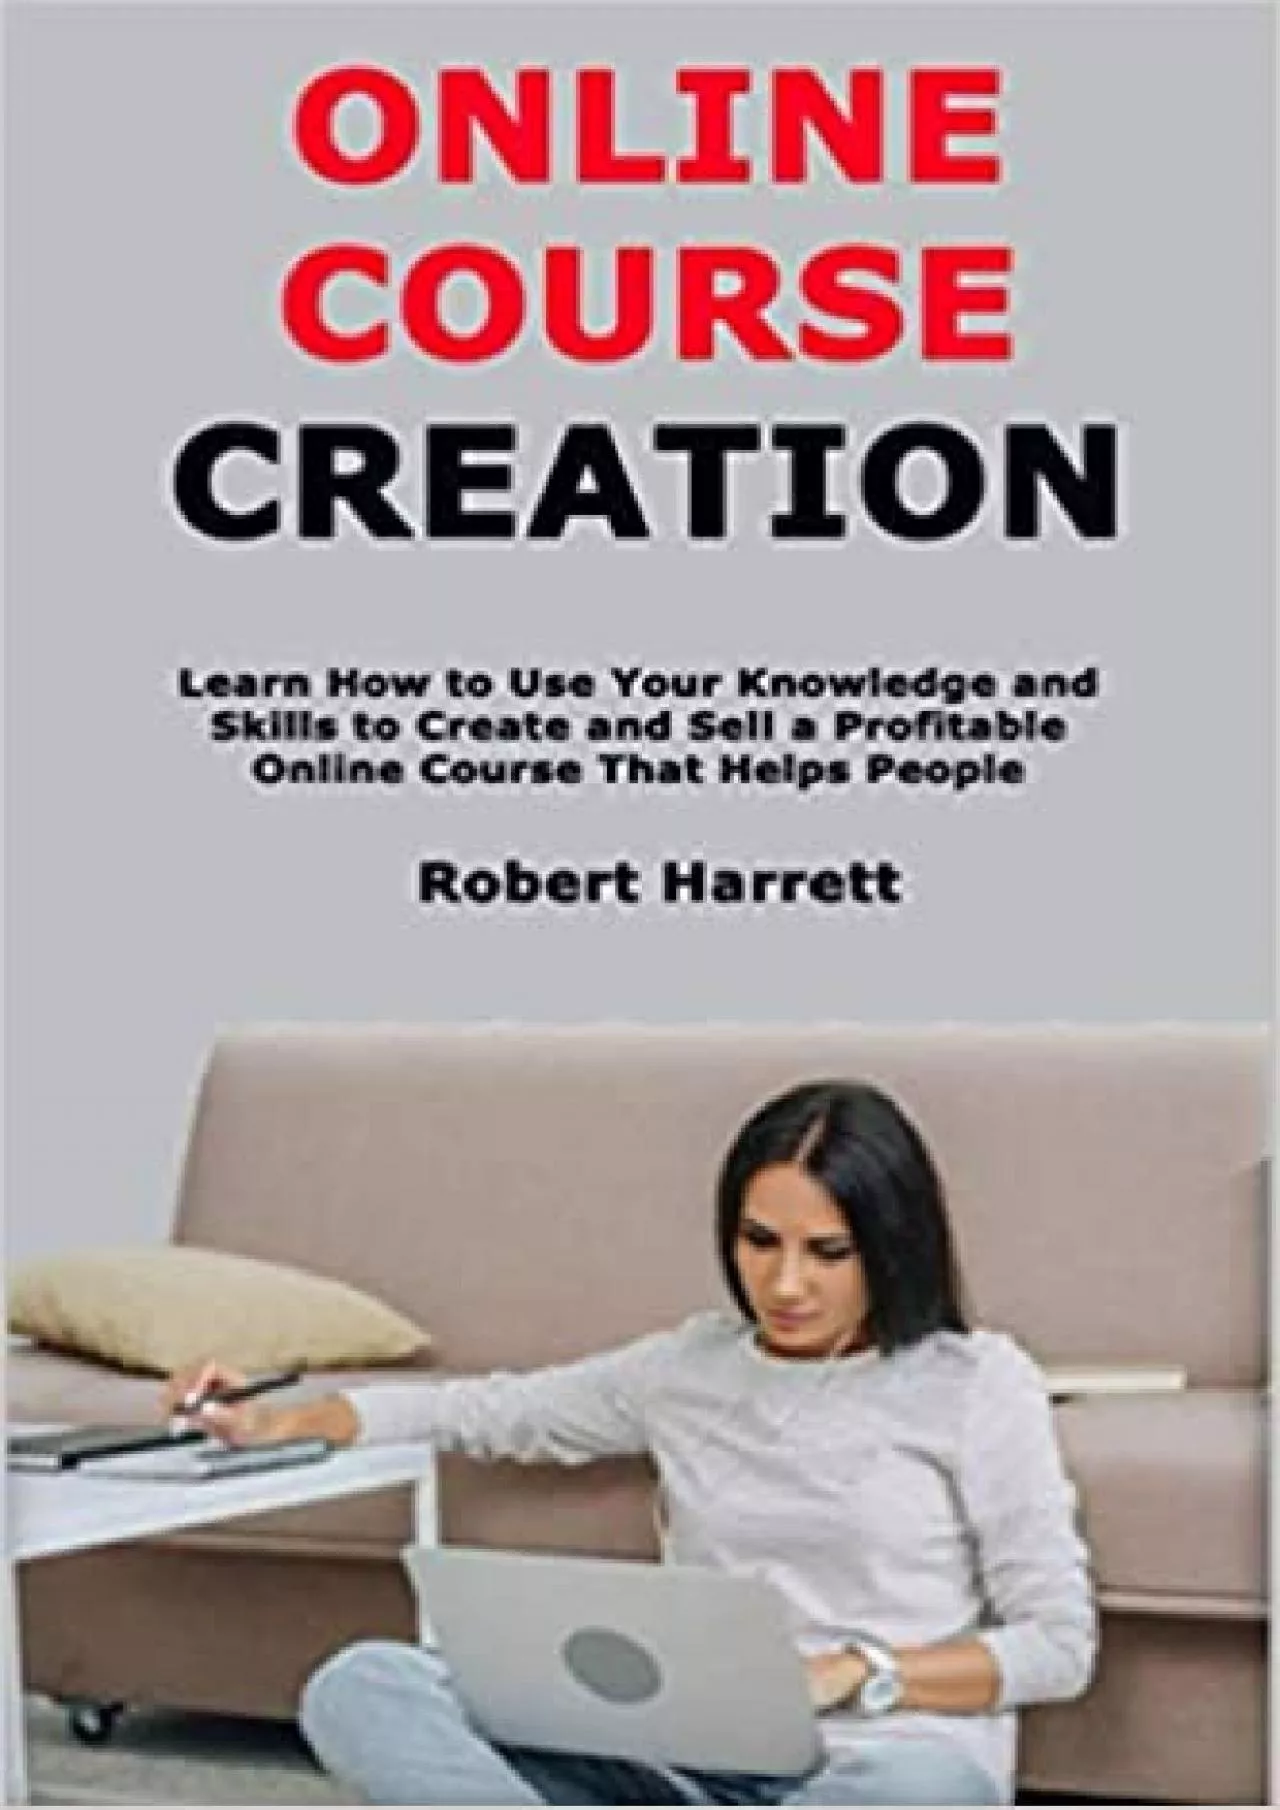 Online Course Creation Learn How to Use Your Knowledge and Skills to Create and Sell a